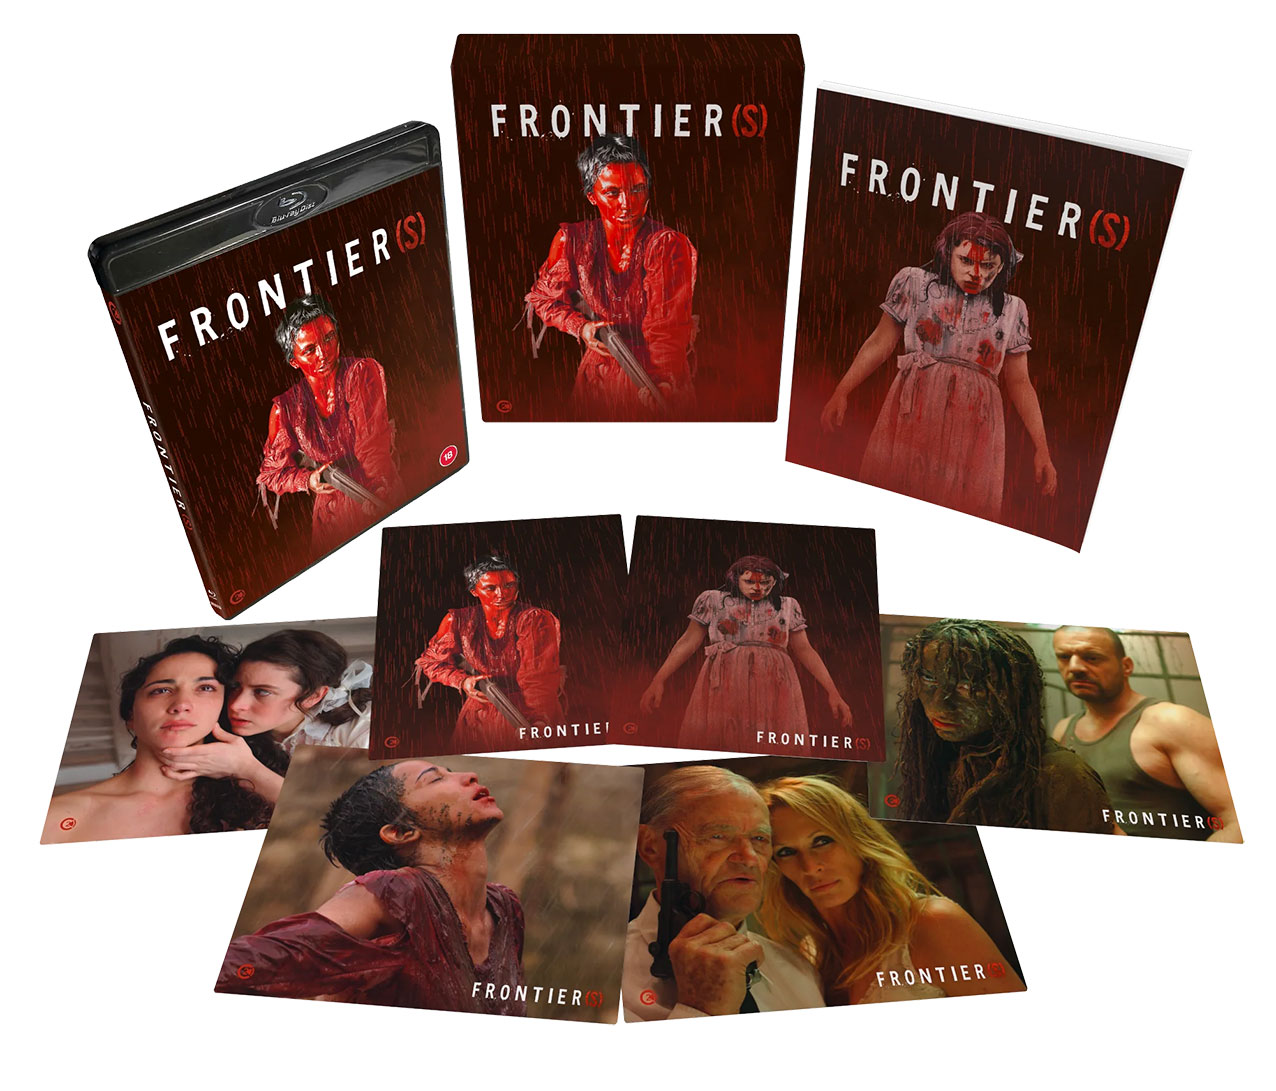 Frontier(s) Blu-ray pack shot